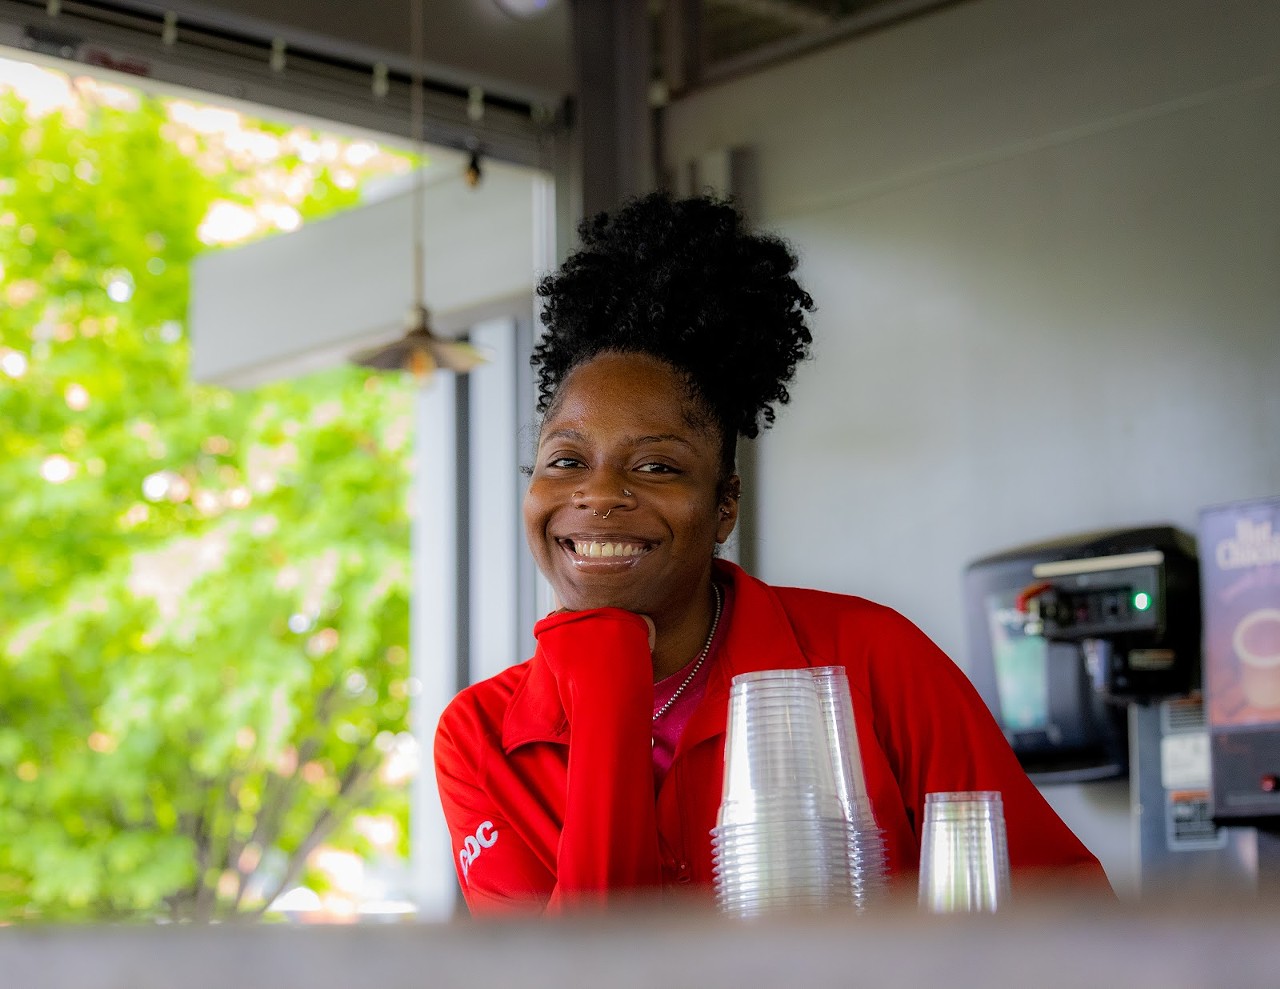 Mauri works at The Porch in Washington Park. She says outside of work, she comes to Washington Park’s concert series over the summer where some older artists will come and perform for free. Mauri grew up Downtown, having lived on Race and McMillan streets. “I actually grew up down here before it was gentrified,” said Mauri.